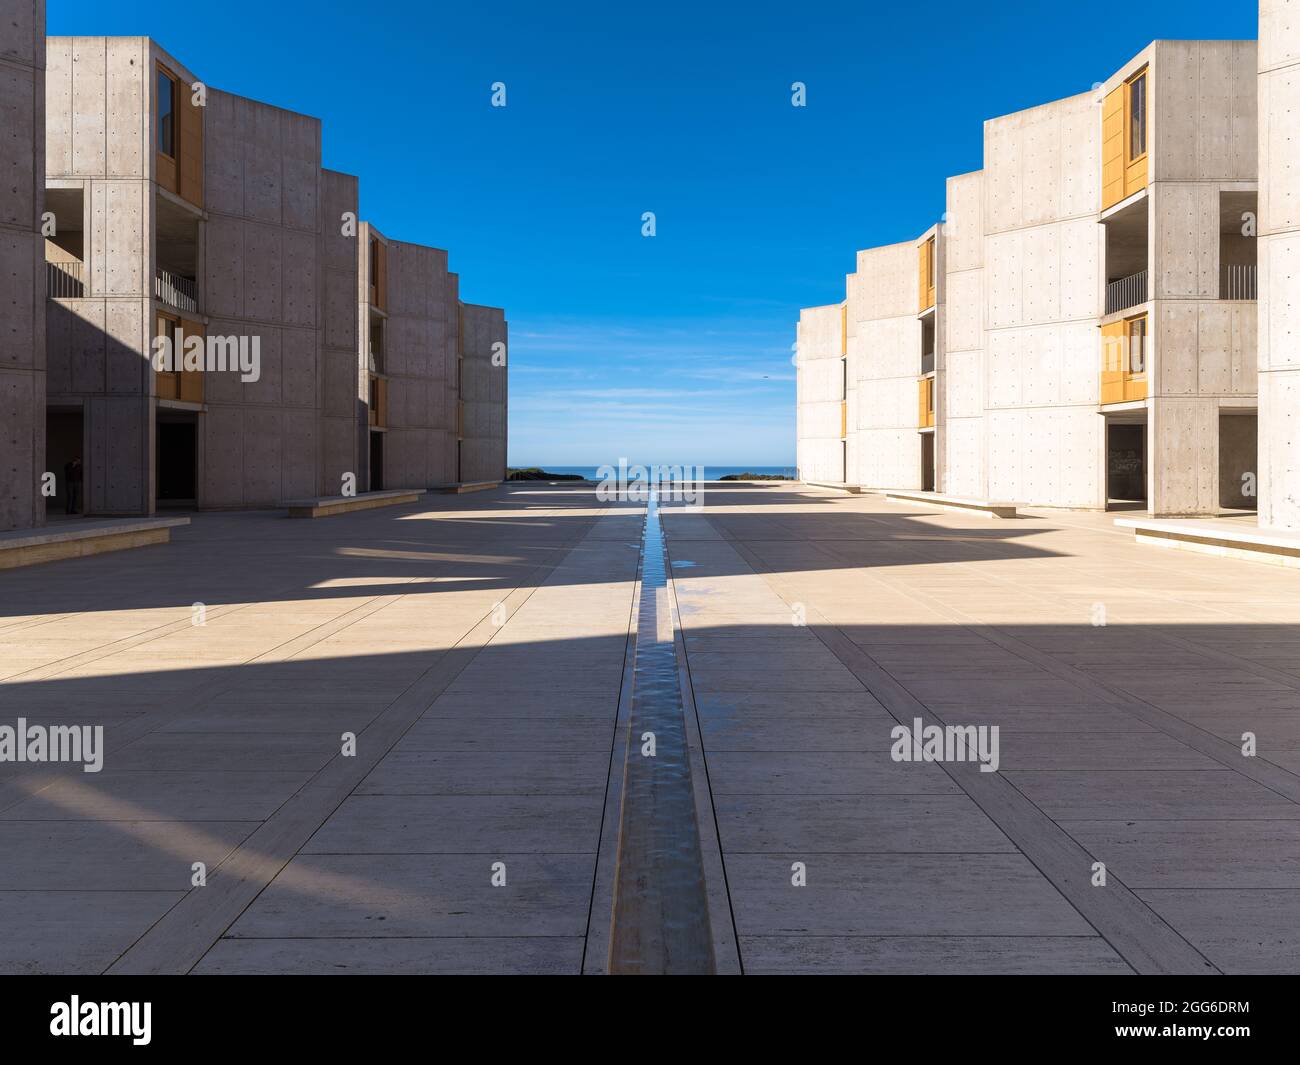 La Jolla, CA / Dec 22, 2018: The Louis Kahn-designed Salk Institute for Biological Studies architecture is world-renowned as an homage to reseach. Stock Photo